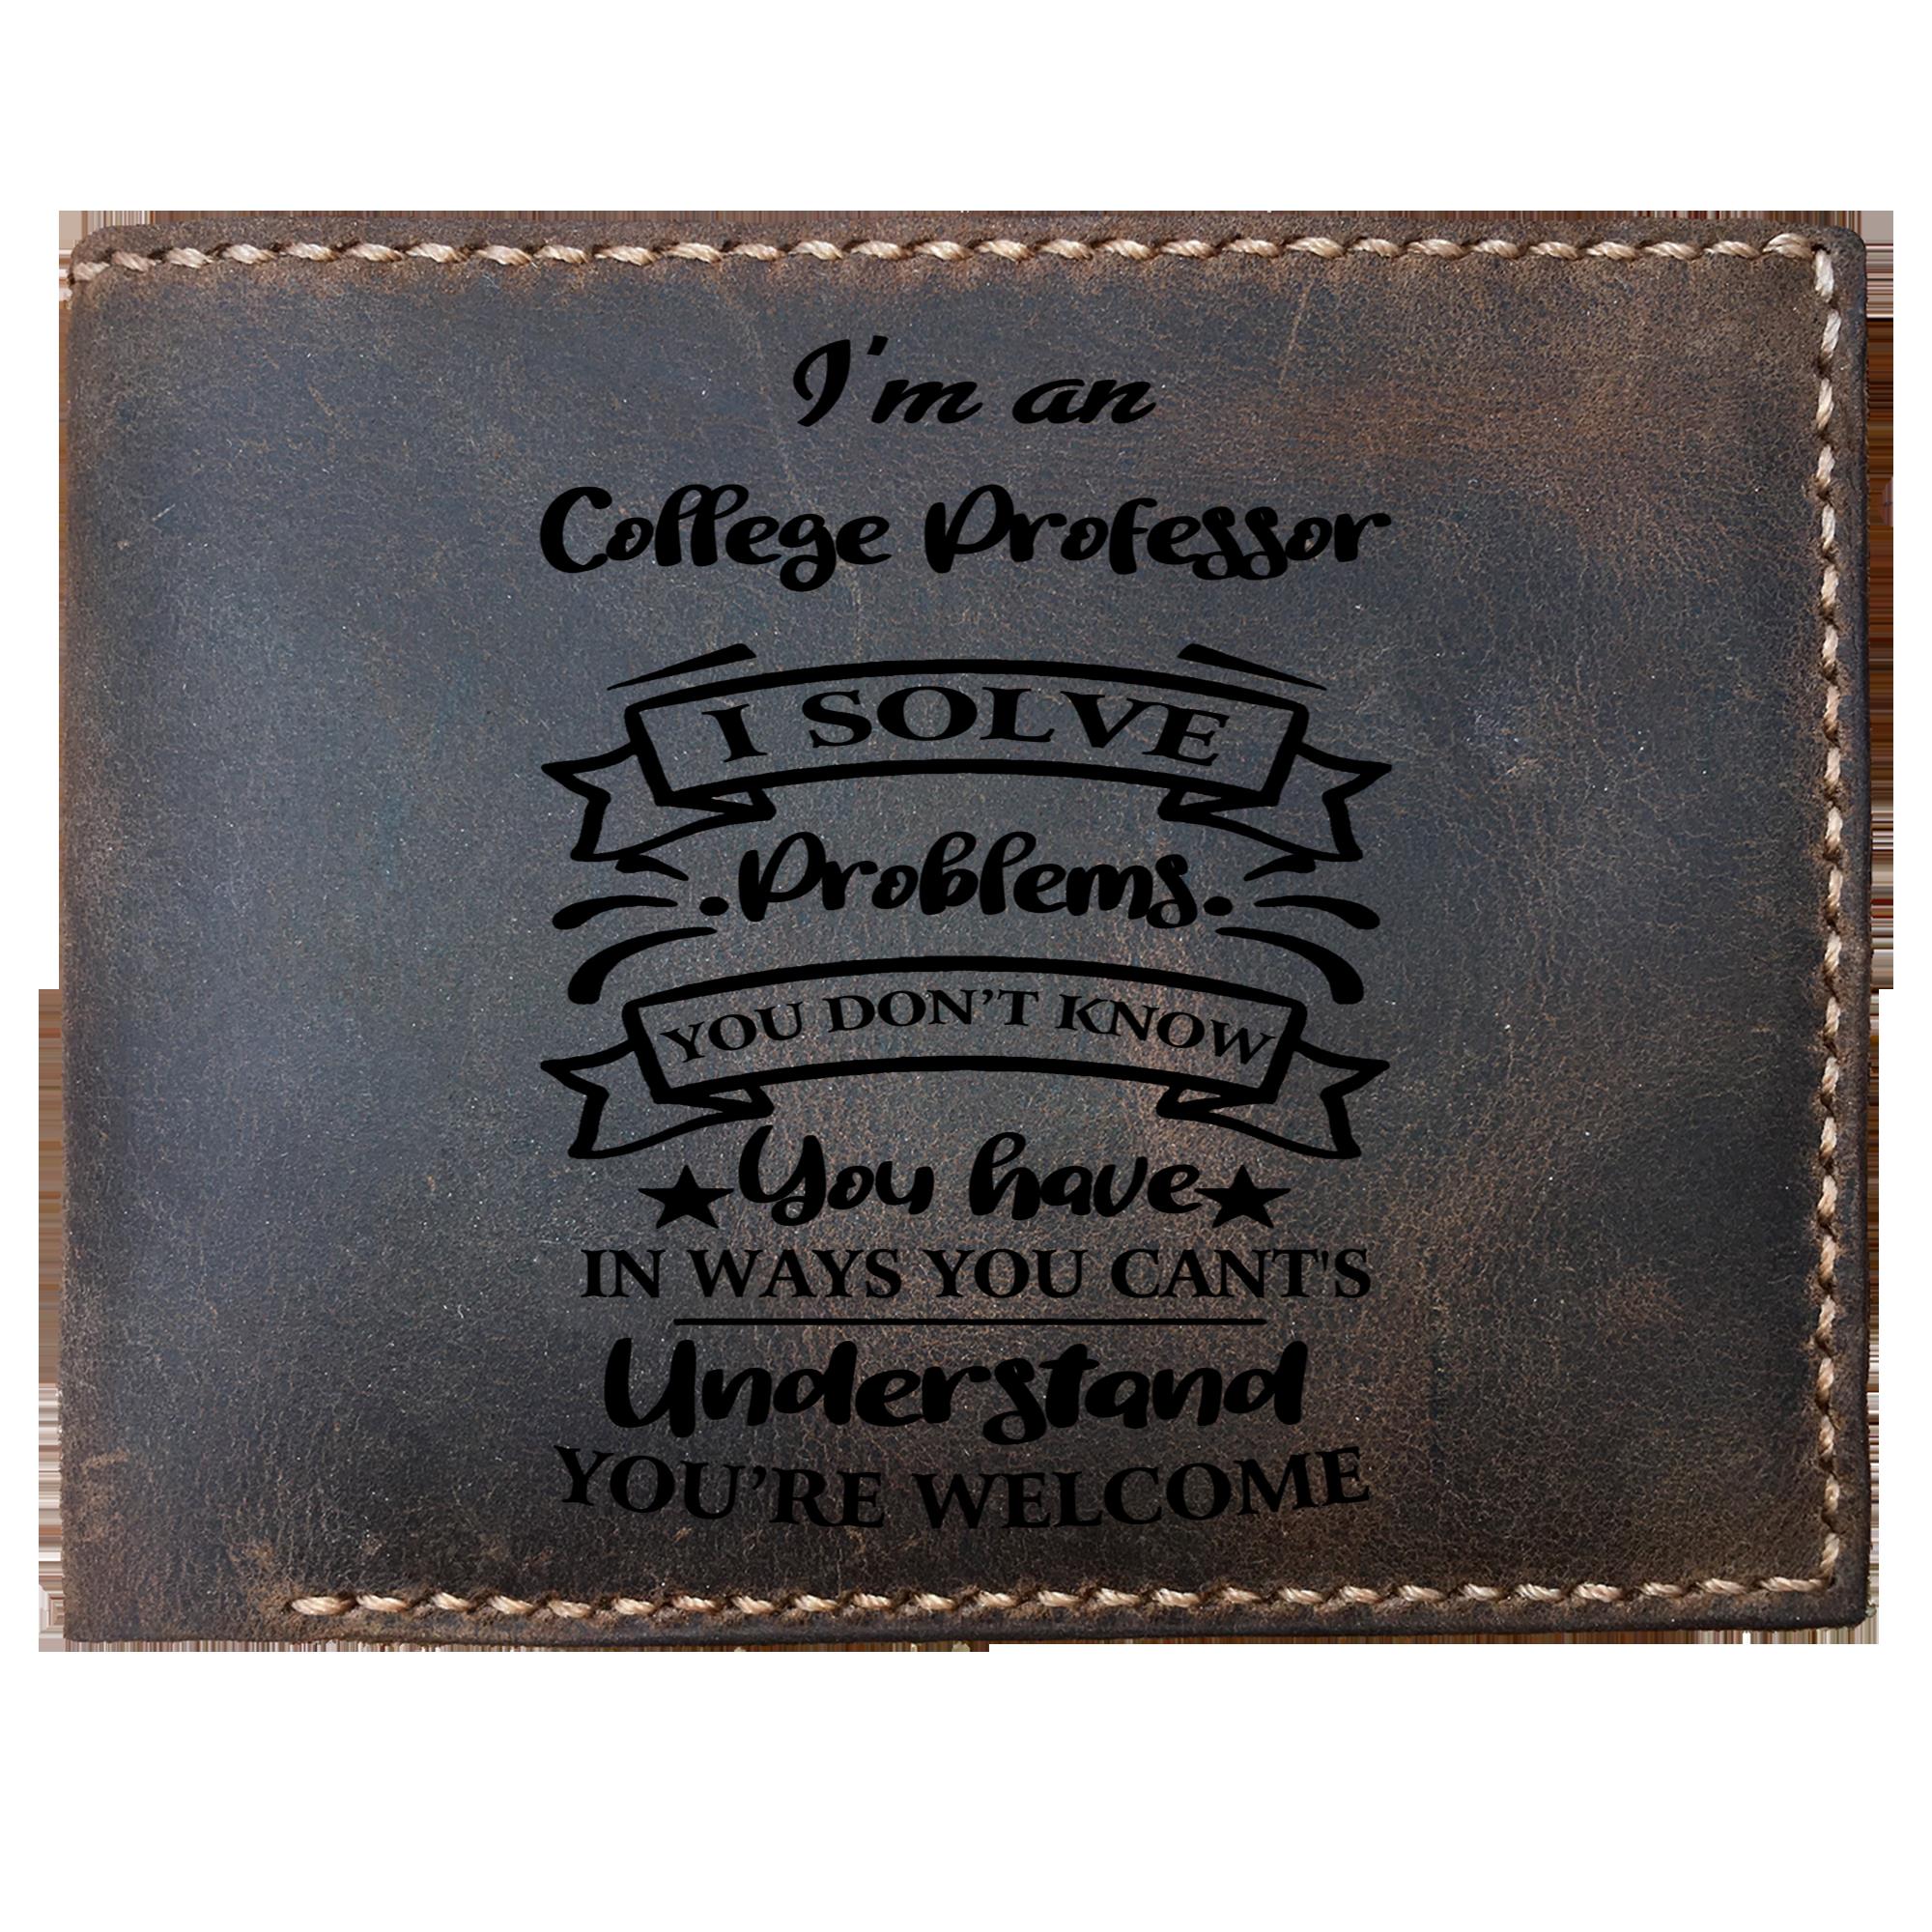 Skitongifts Funny Custom Laser Engraved Bifold Leather Wallet For Men, I'm an College Professor Solve Problems, Father's Day Gifts